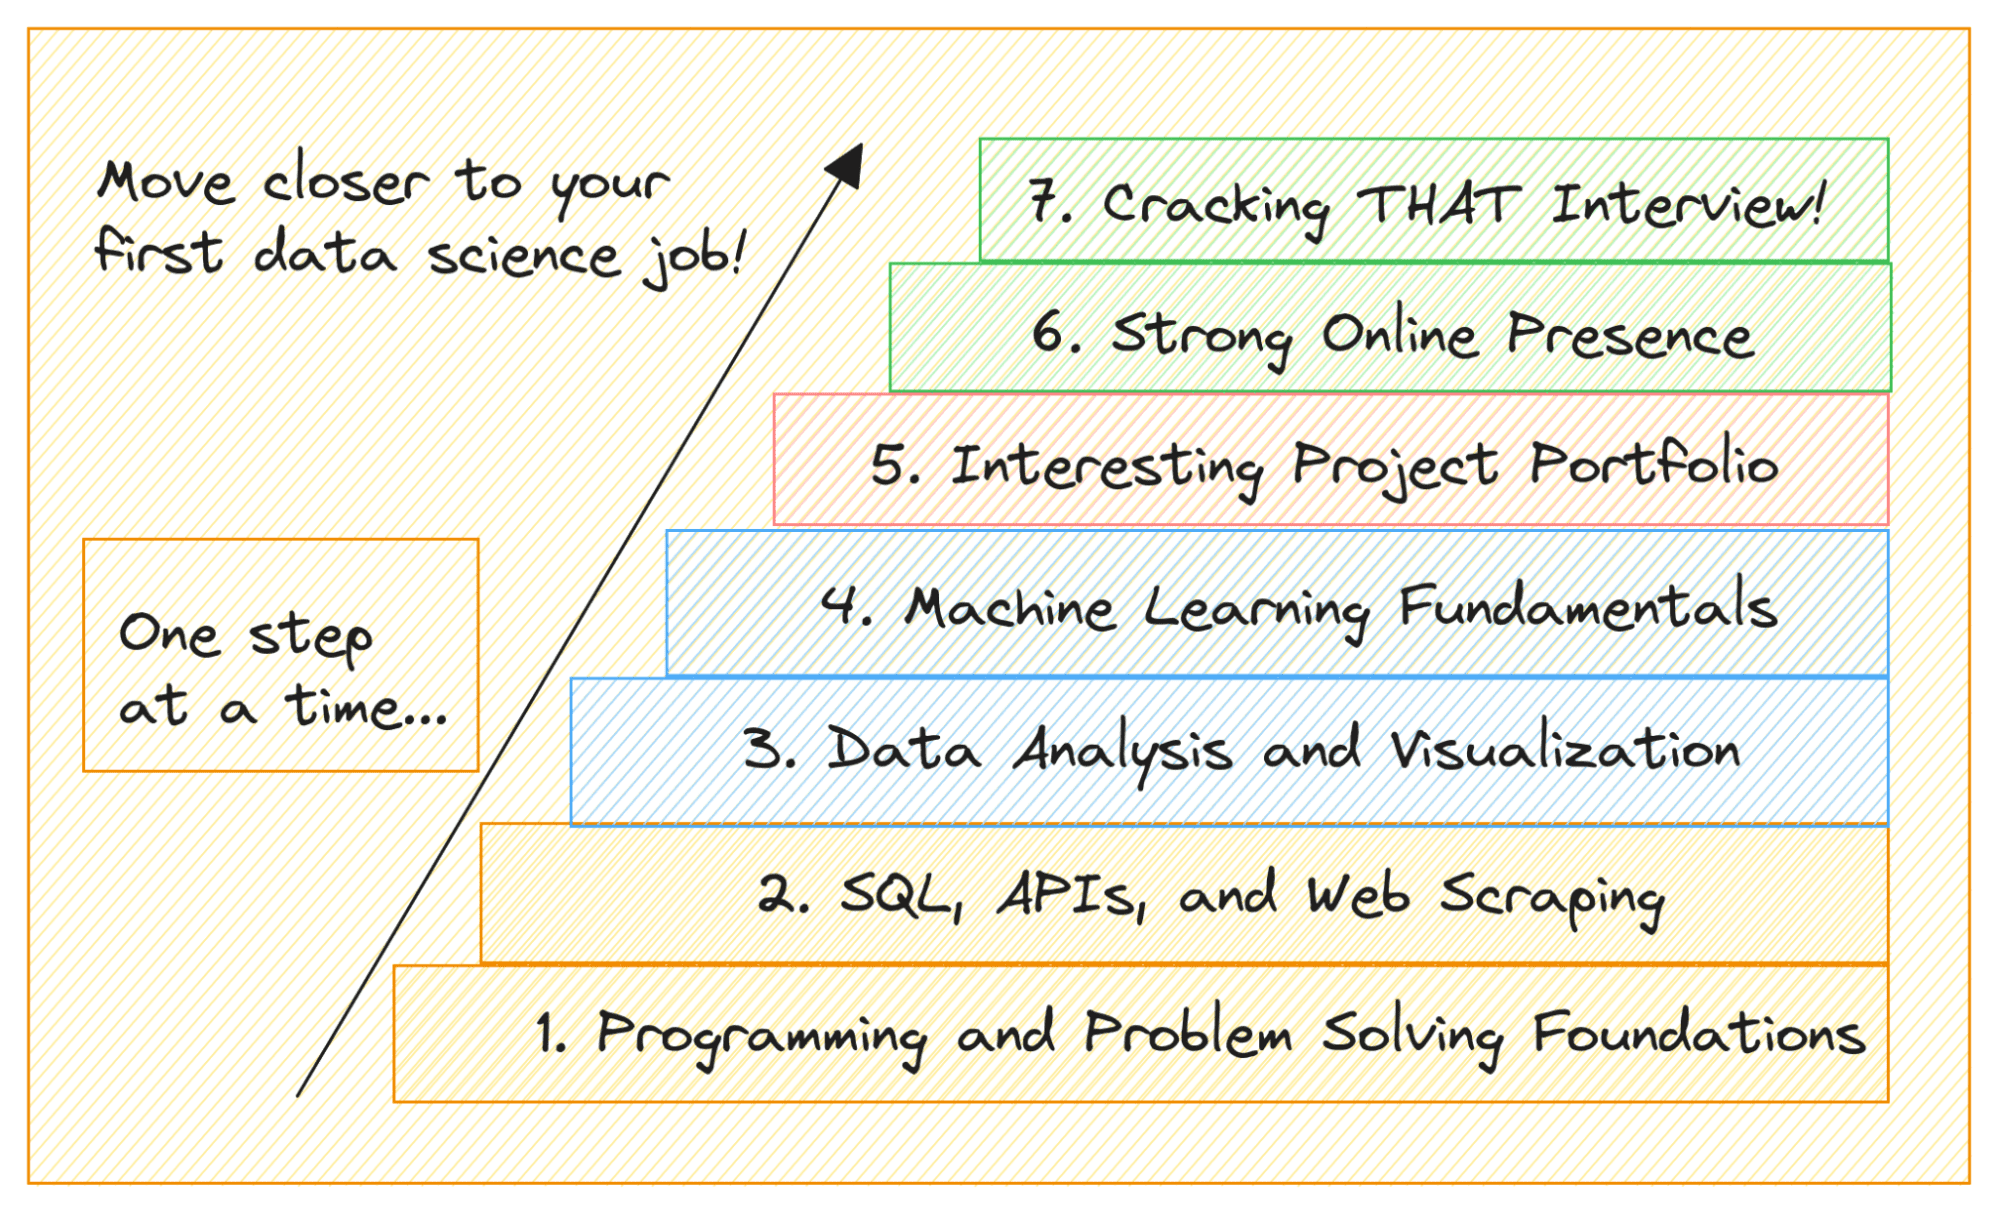 7 Steps to Landing Your First Data Science Job - KDnuggets